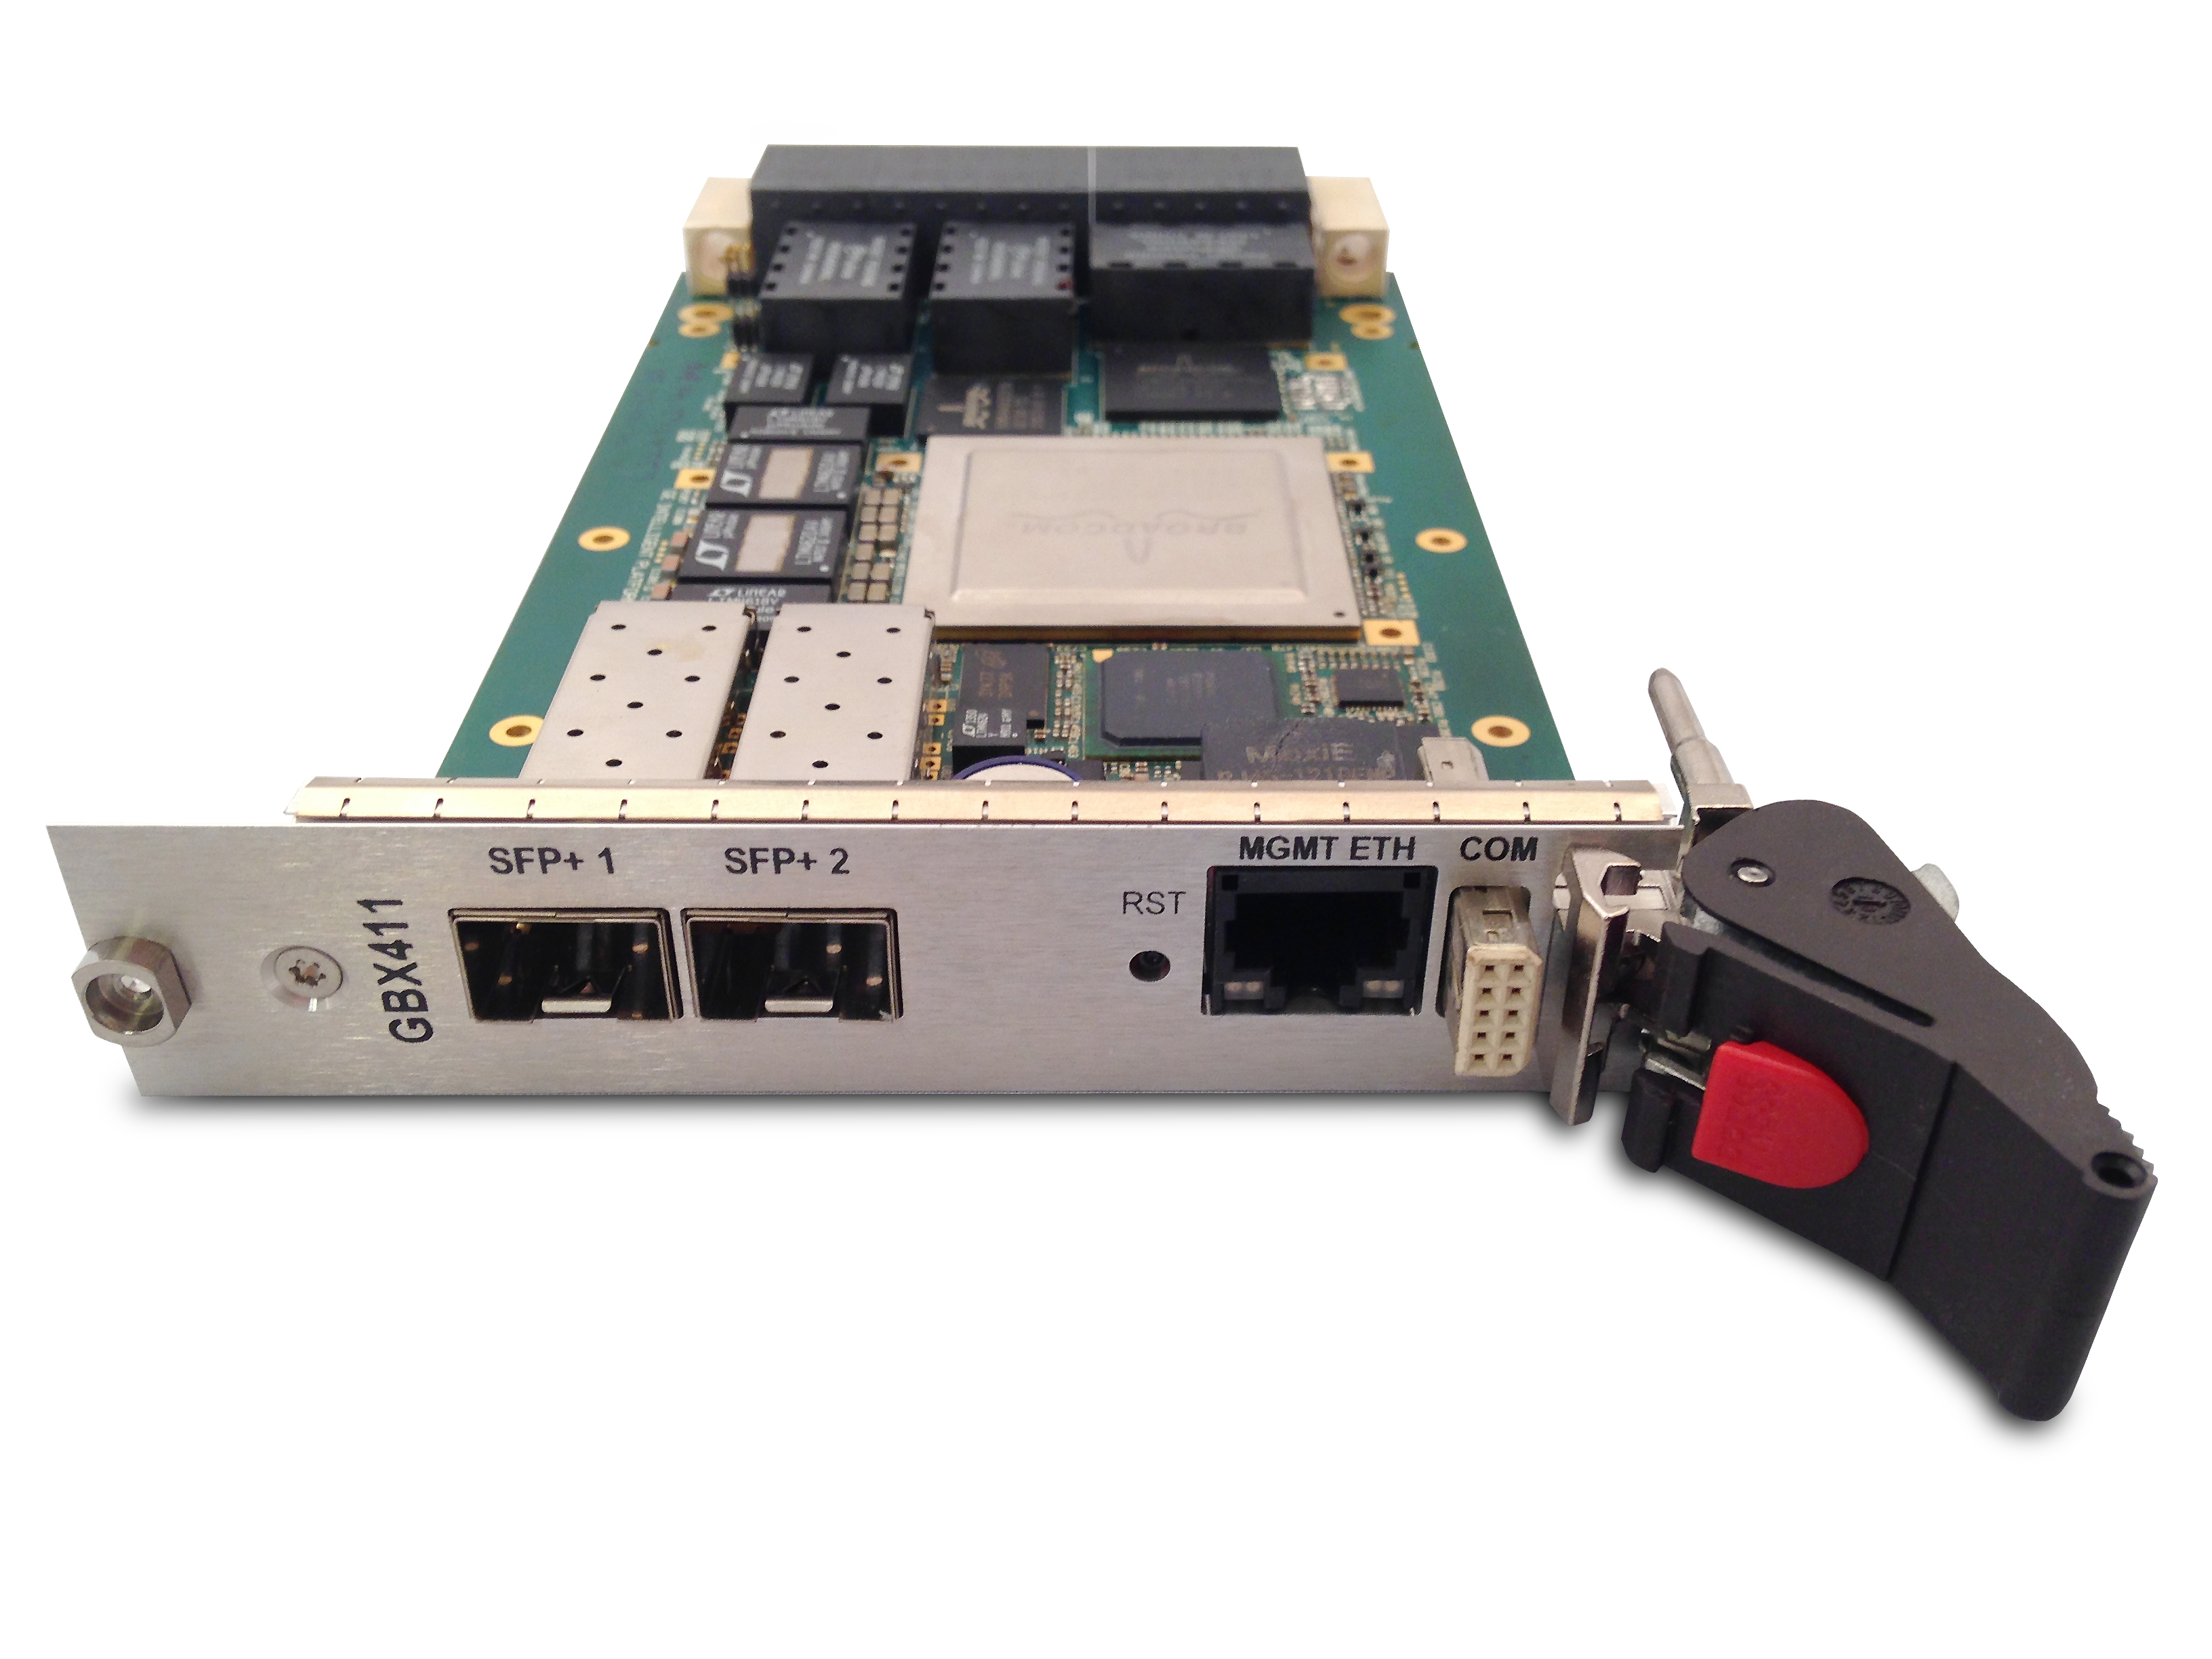 Abaco Systems' GBX411 rugged managed Ethernet switch